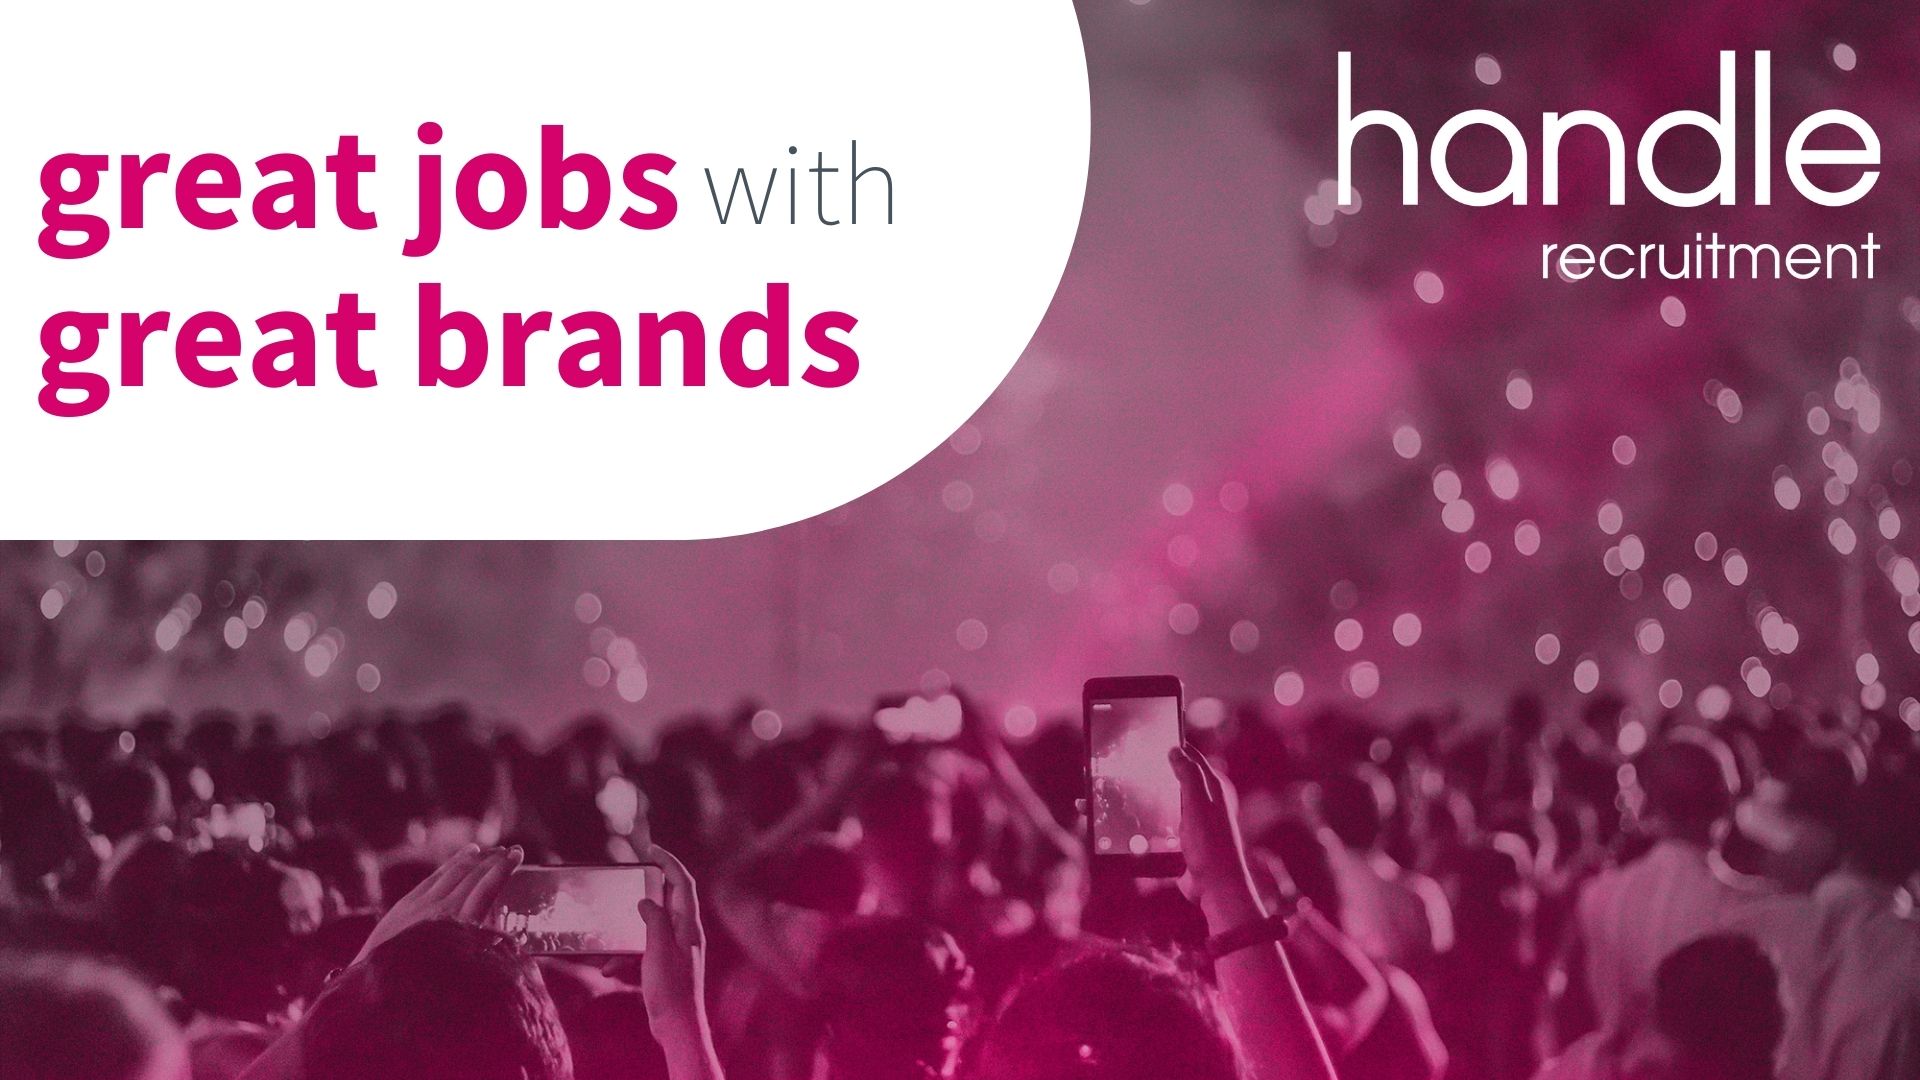 Great Jobs with great brands - Handle Recruitment